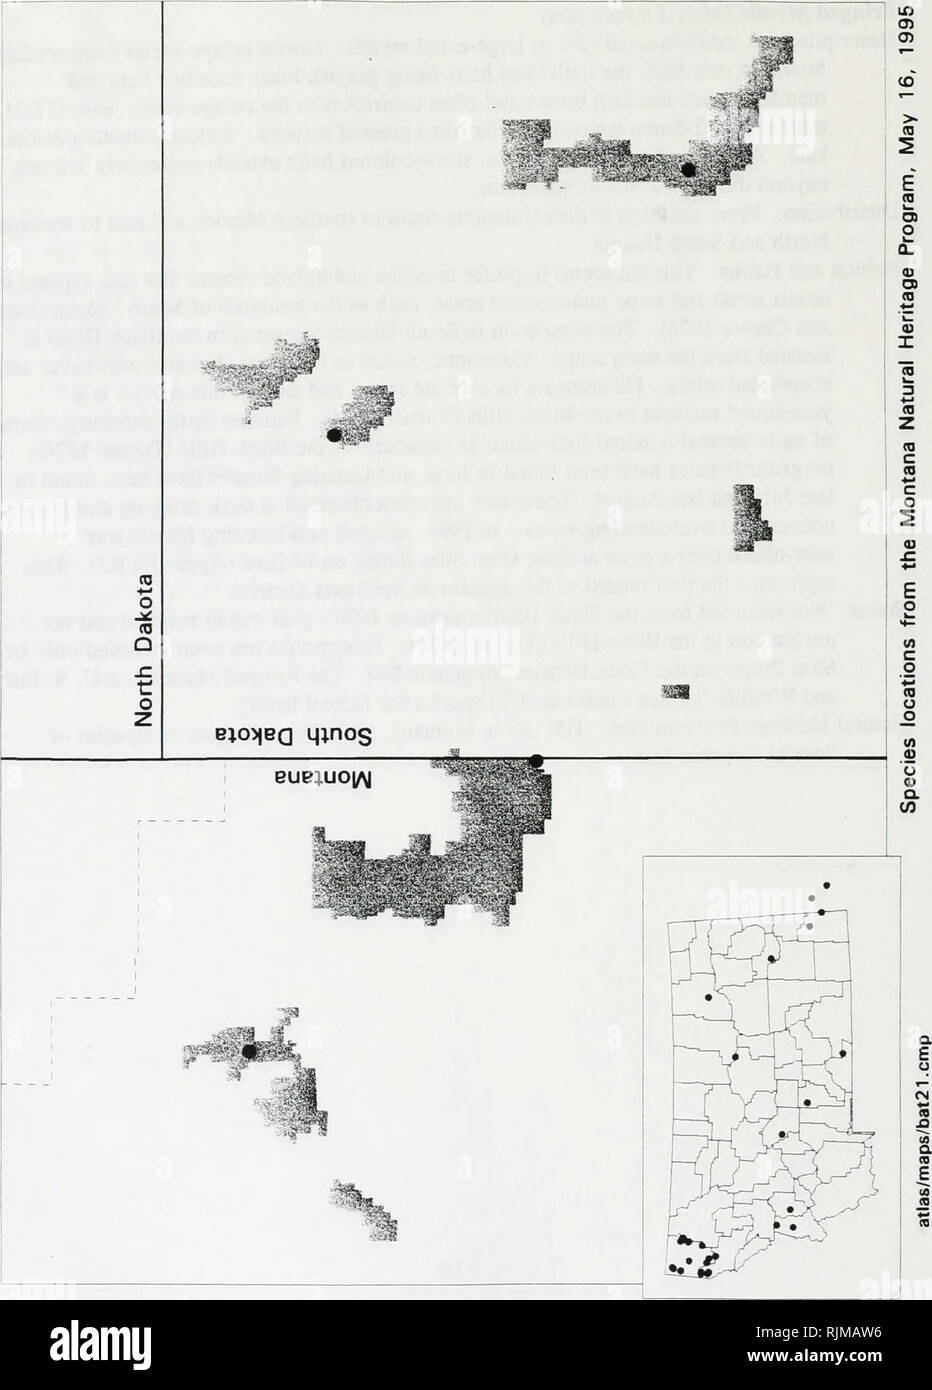 . Bat survey of the Sioux District, Custer National Forest : 1994 . Bats; Bats; Bats; Bats; Anabat bat detection systems; Bats; Bats; Long-eared myotis; Long-eared myotis; Western small-footed myotis; Western small-footed myotis; Long-legged myotis; Long-legged myotis; Fringed myotis; Fringed myotis; Big brown bat; Big brown bat; Silver-haired bat; Silver-haired bat; Hoary bat; Hoary bat; Plecotus townsendii; Plecotus townsendii; Mist netting. . Please note that these images are extracted from scanned page images that may have been digitally enhanced for readability - coloration and appearance Stock Photo